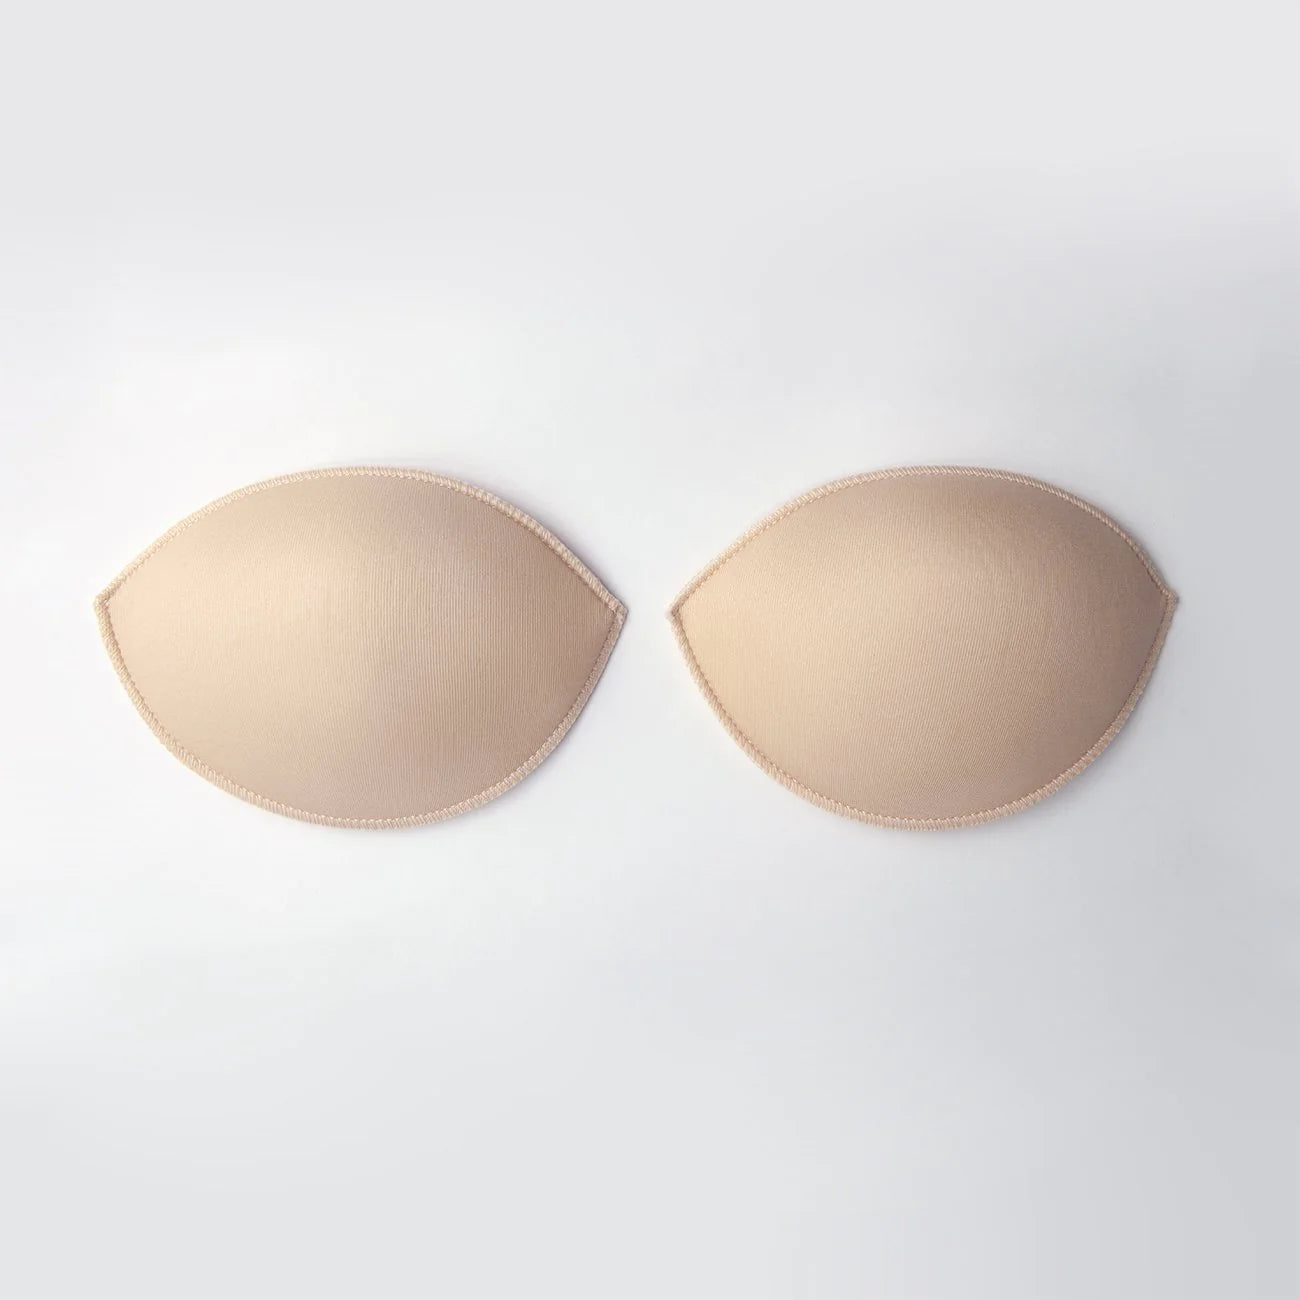 Water Push Up Pads 5108 - Nude - A/B, C/D